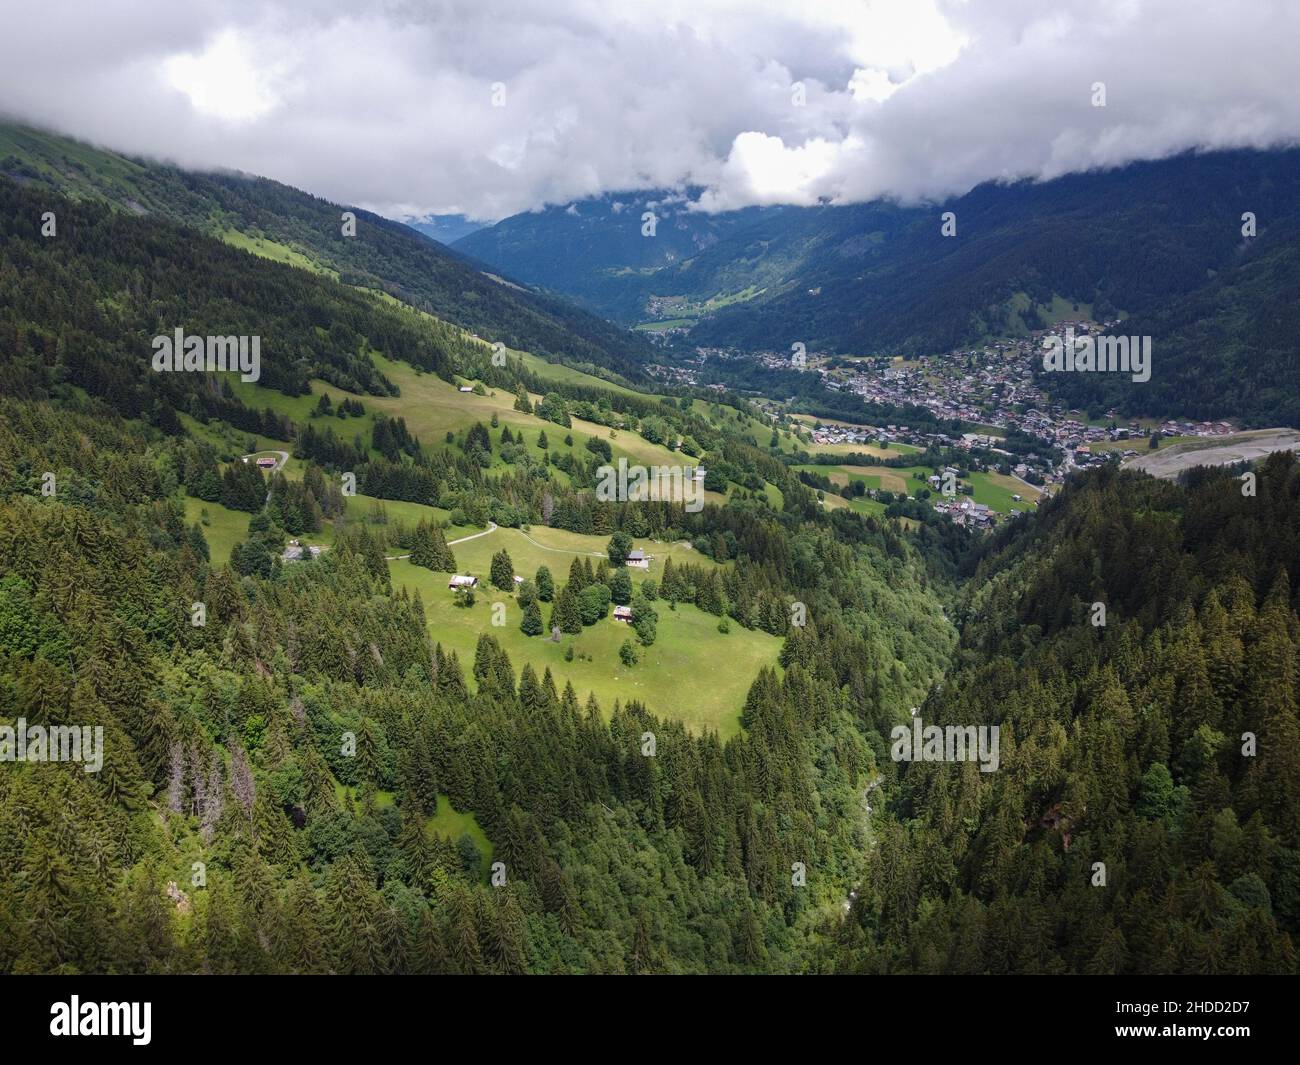 Panoramic view on mountain villages, green forests and apline meadows near Saint-Gervais-les-Bains, Savoy, France in summer Stock Photo